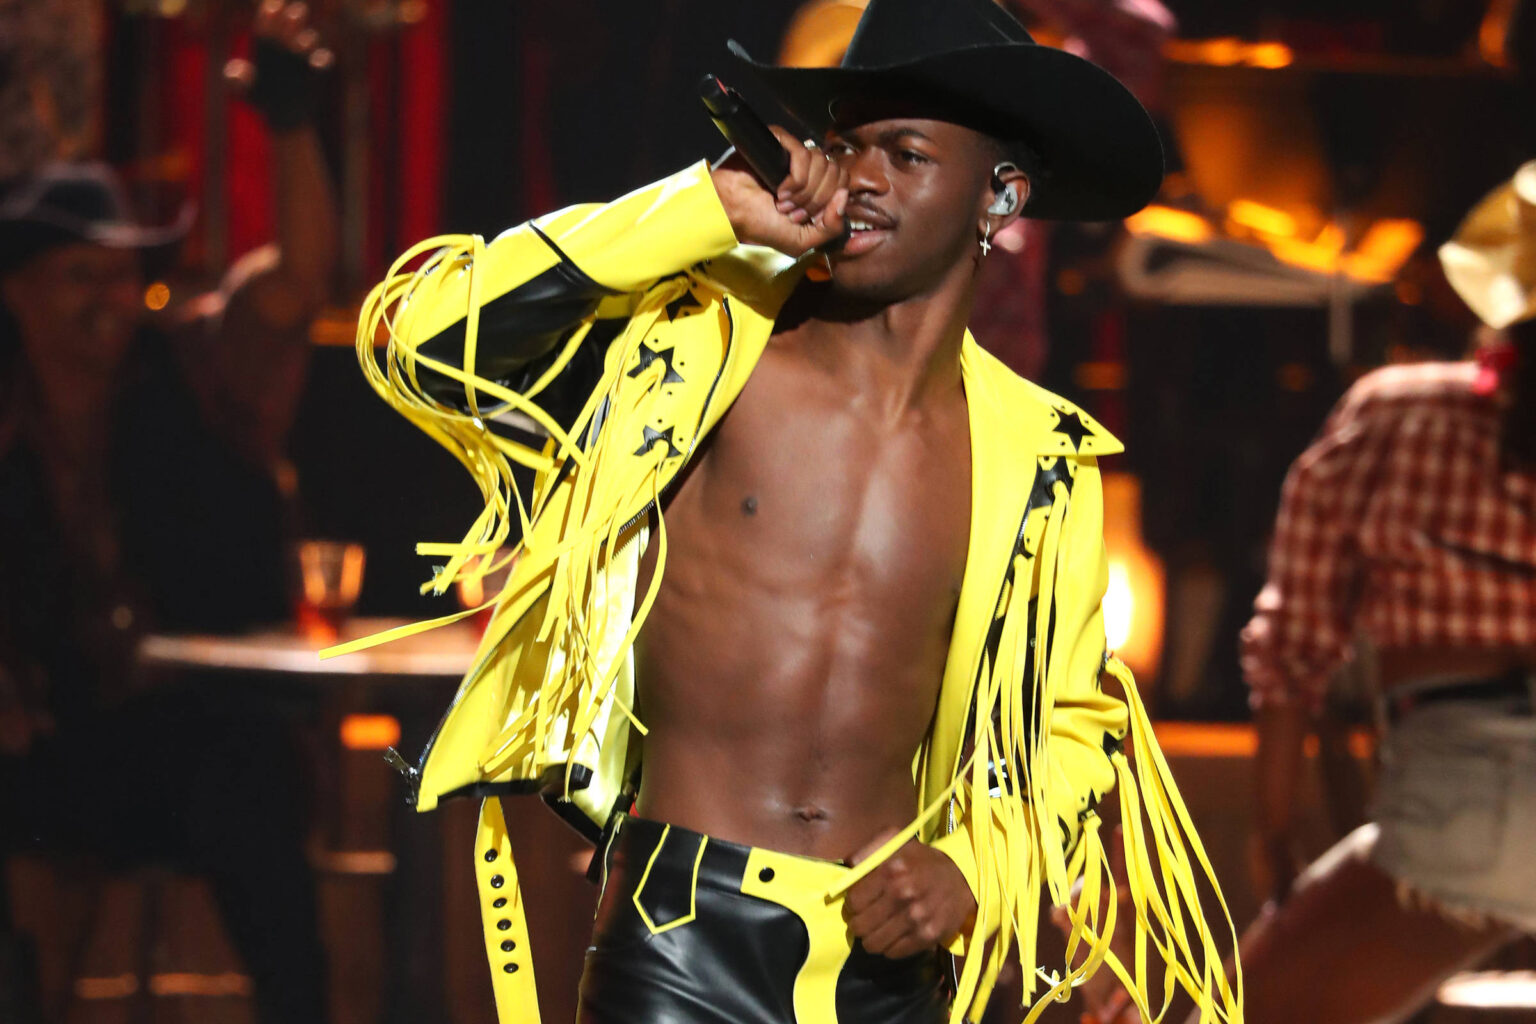 old town road lil nas x mp3 download